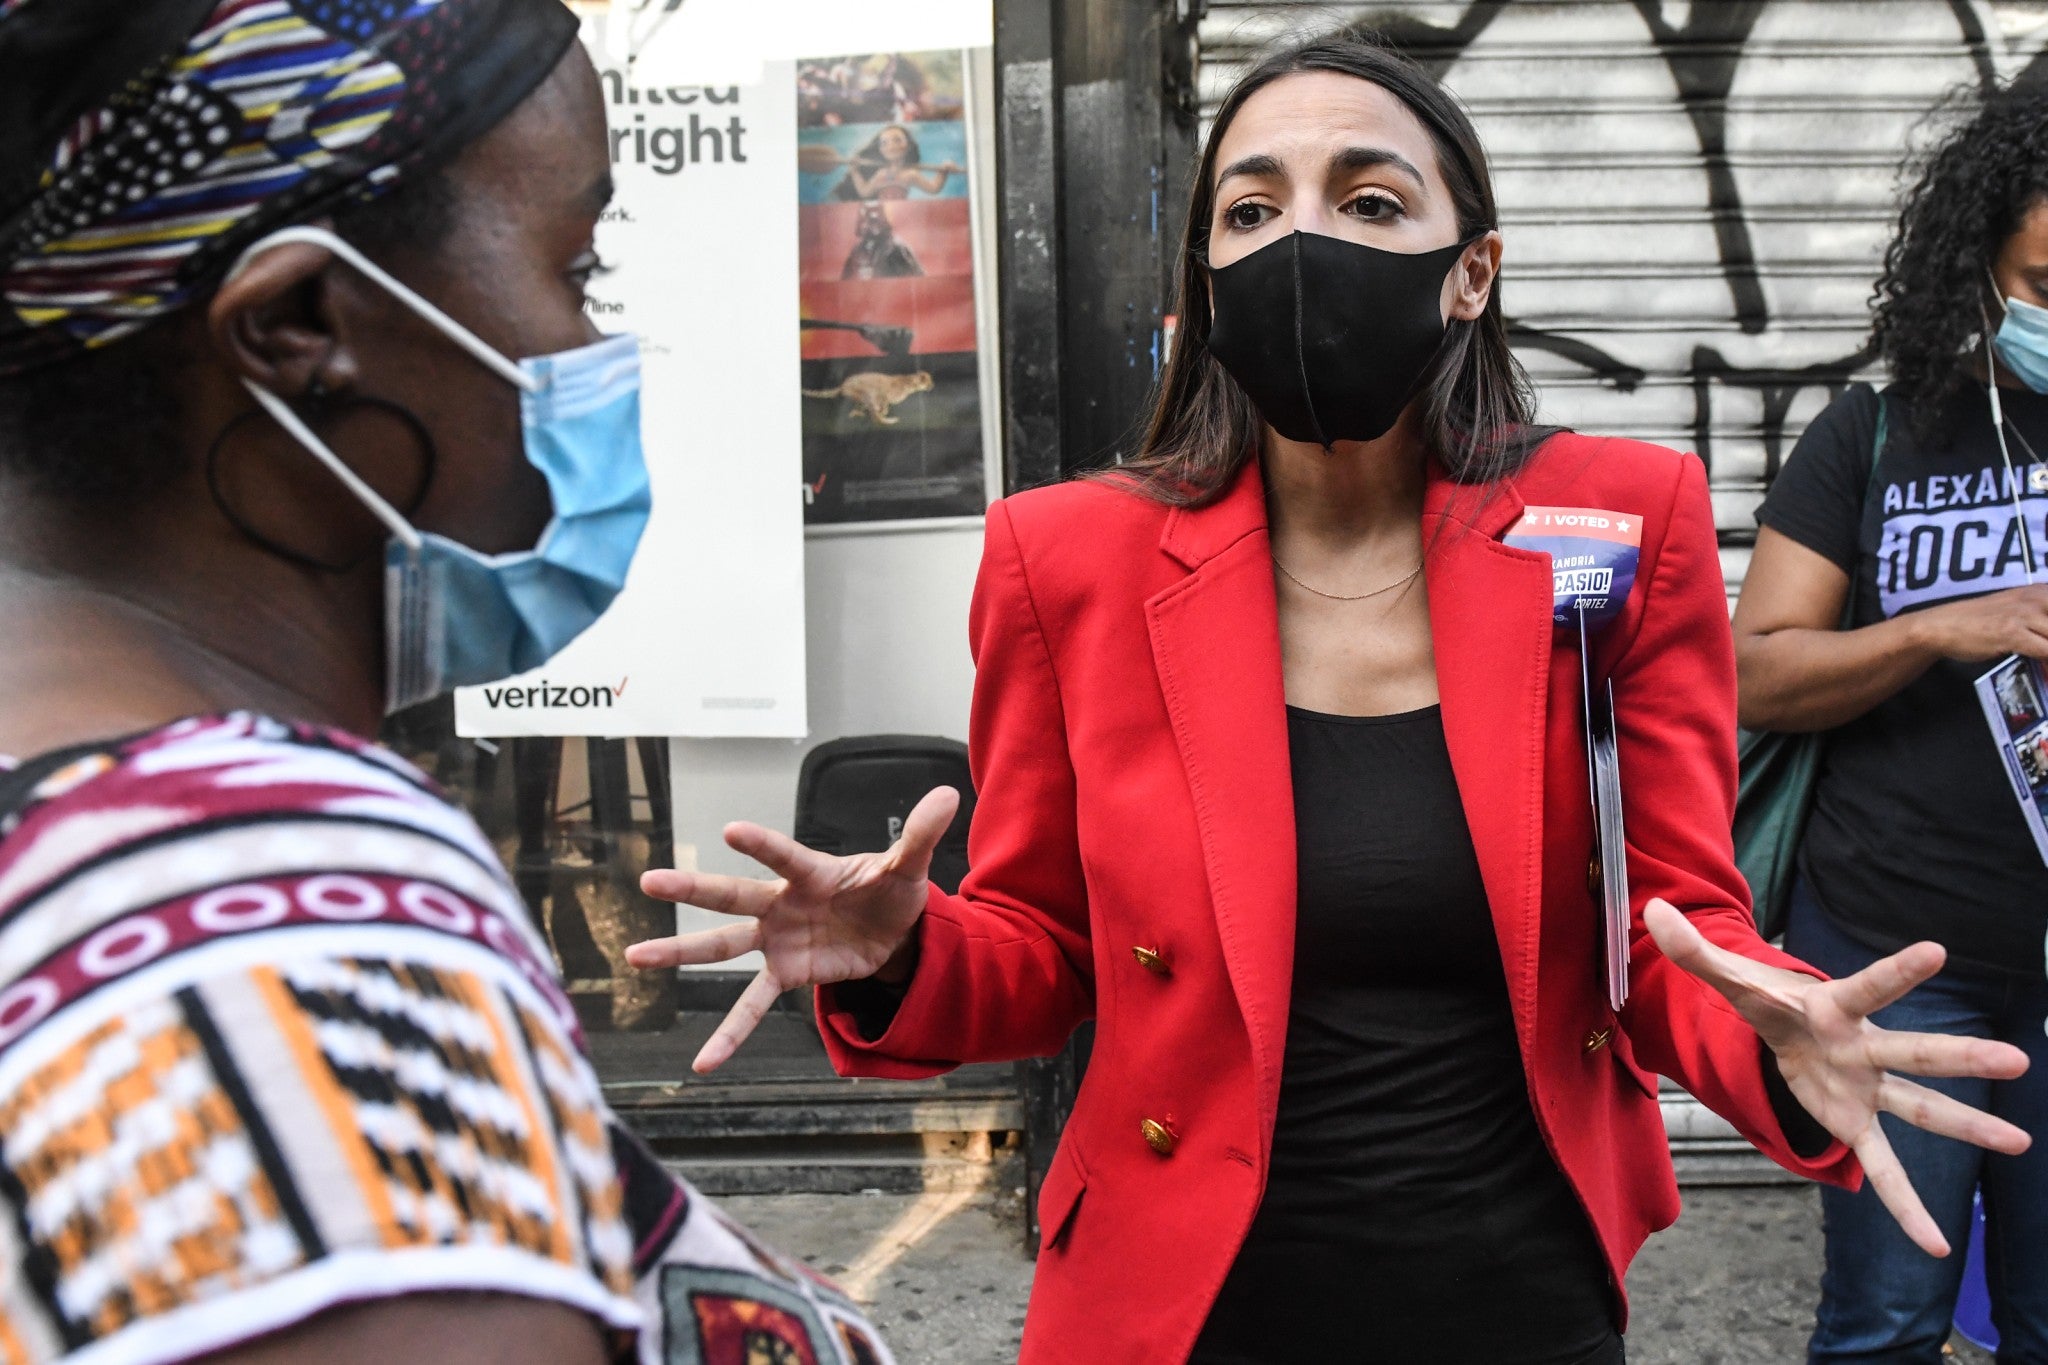 Alexandria Ocasio-Cortez has spoken on numerous occasions about how Puerto Ricans are treated 'like second-class citizens' and signed a letter to La Junta in 2019 alongside Bernie Sanders and 11 members of Congress